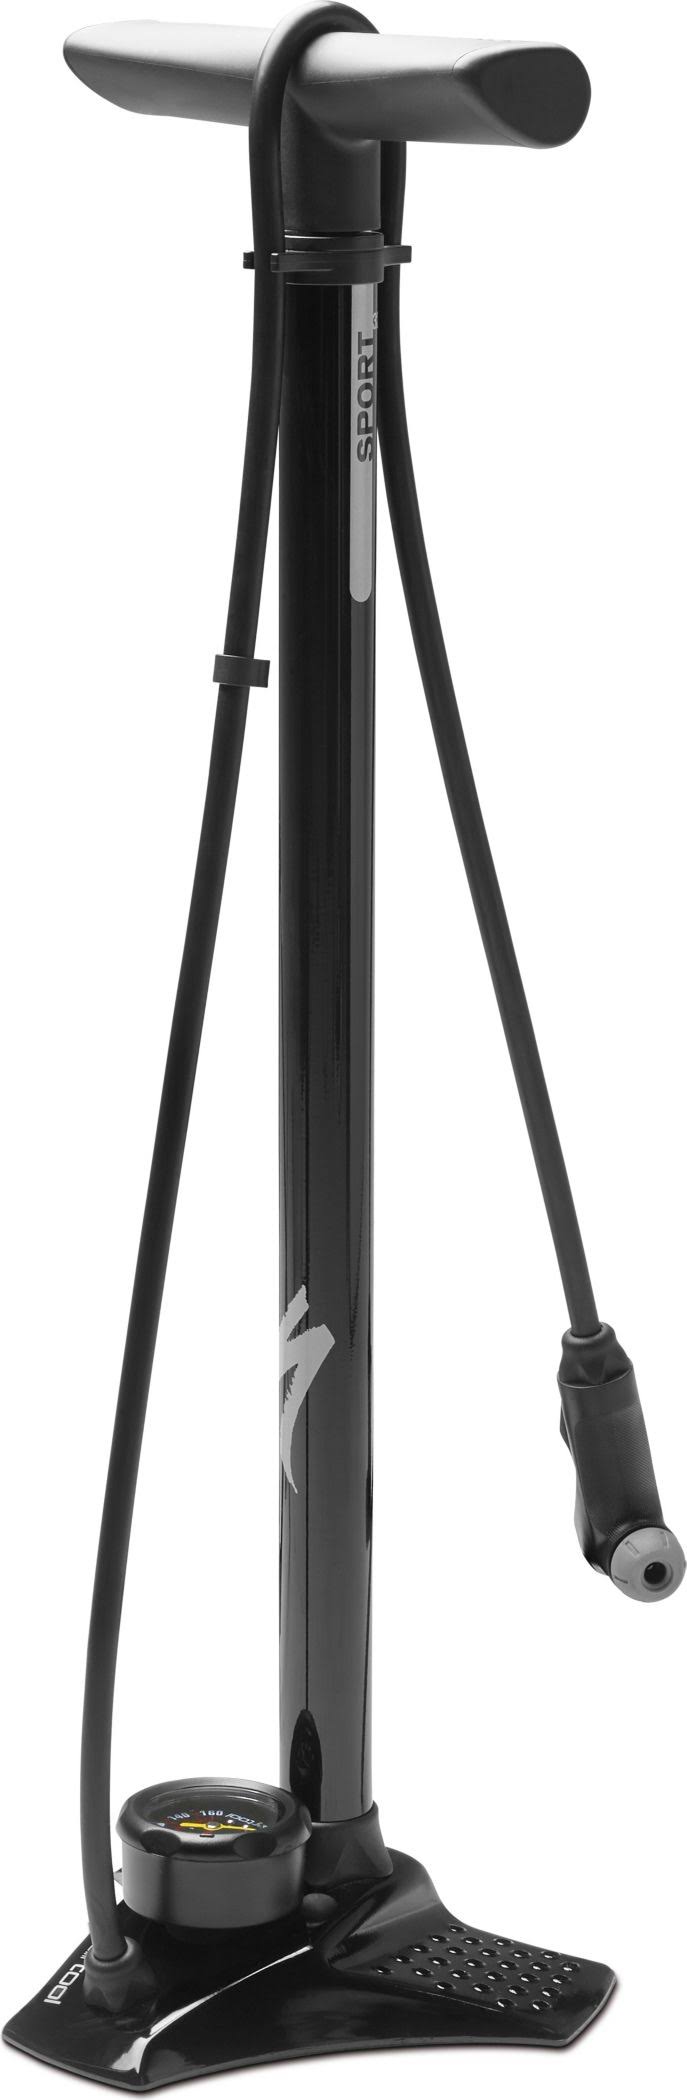 Specialized Air Tool Sport Switchhitter II Floor Pump - Black